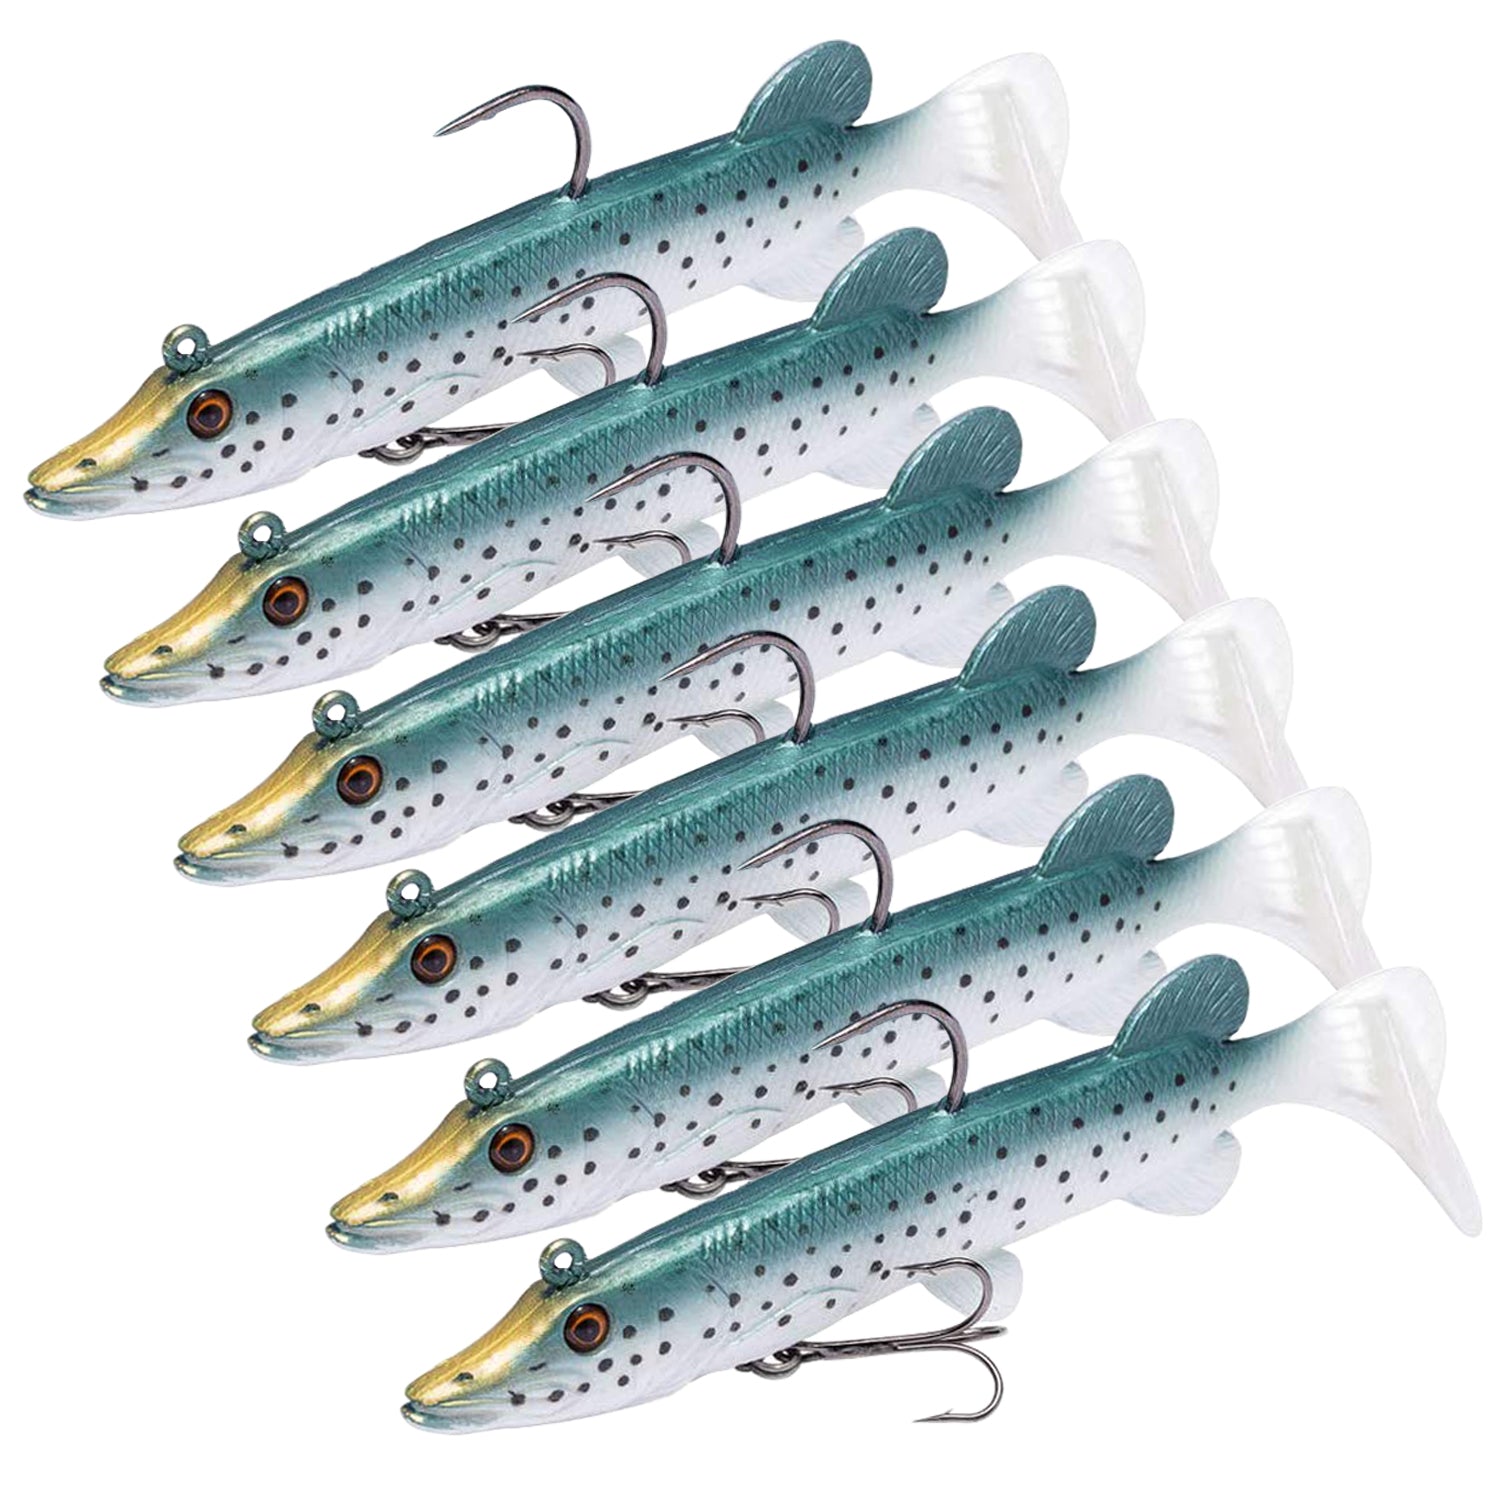 6 Pack of 5 Inch McArthy Paddle Tail Soft Plastic Fishing Lures